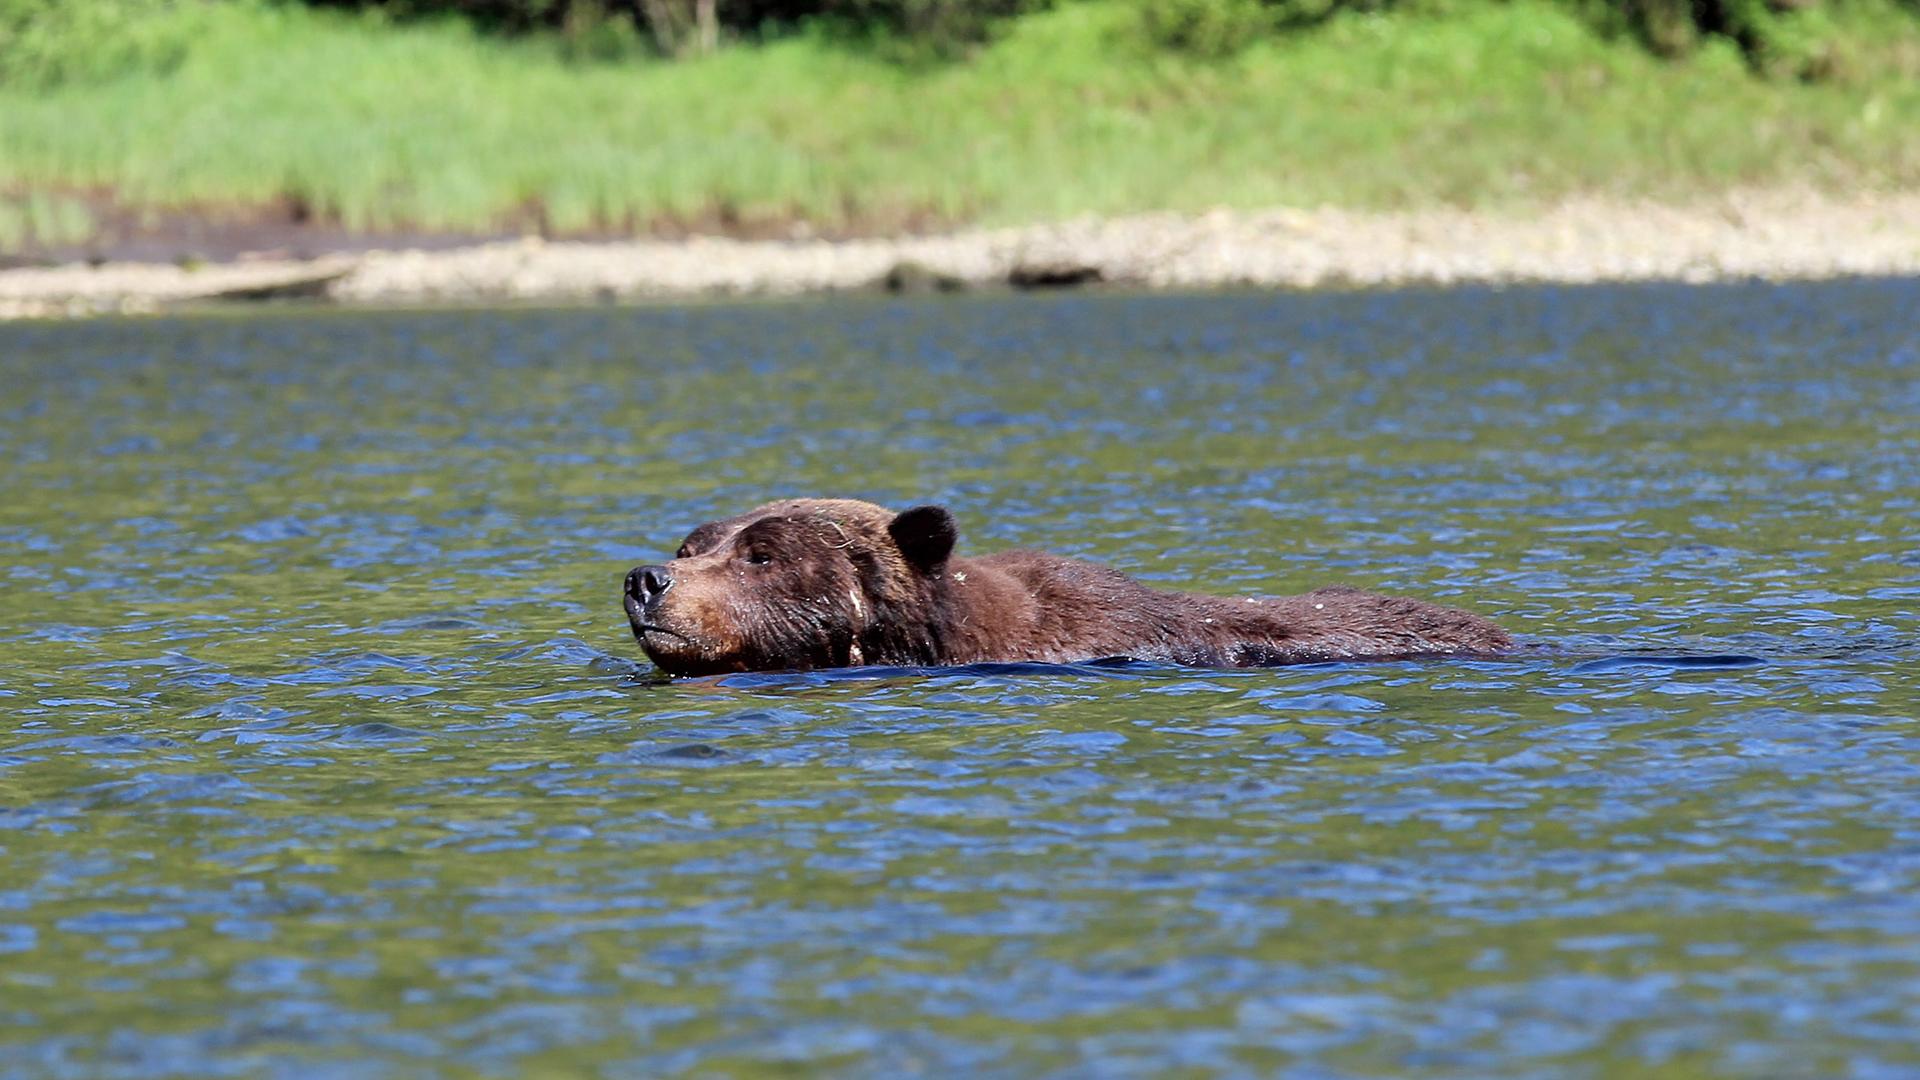 A grizzly local guides call Bo Diddley swimming across the estuary in pursuit of a female bear.